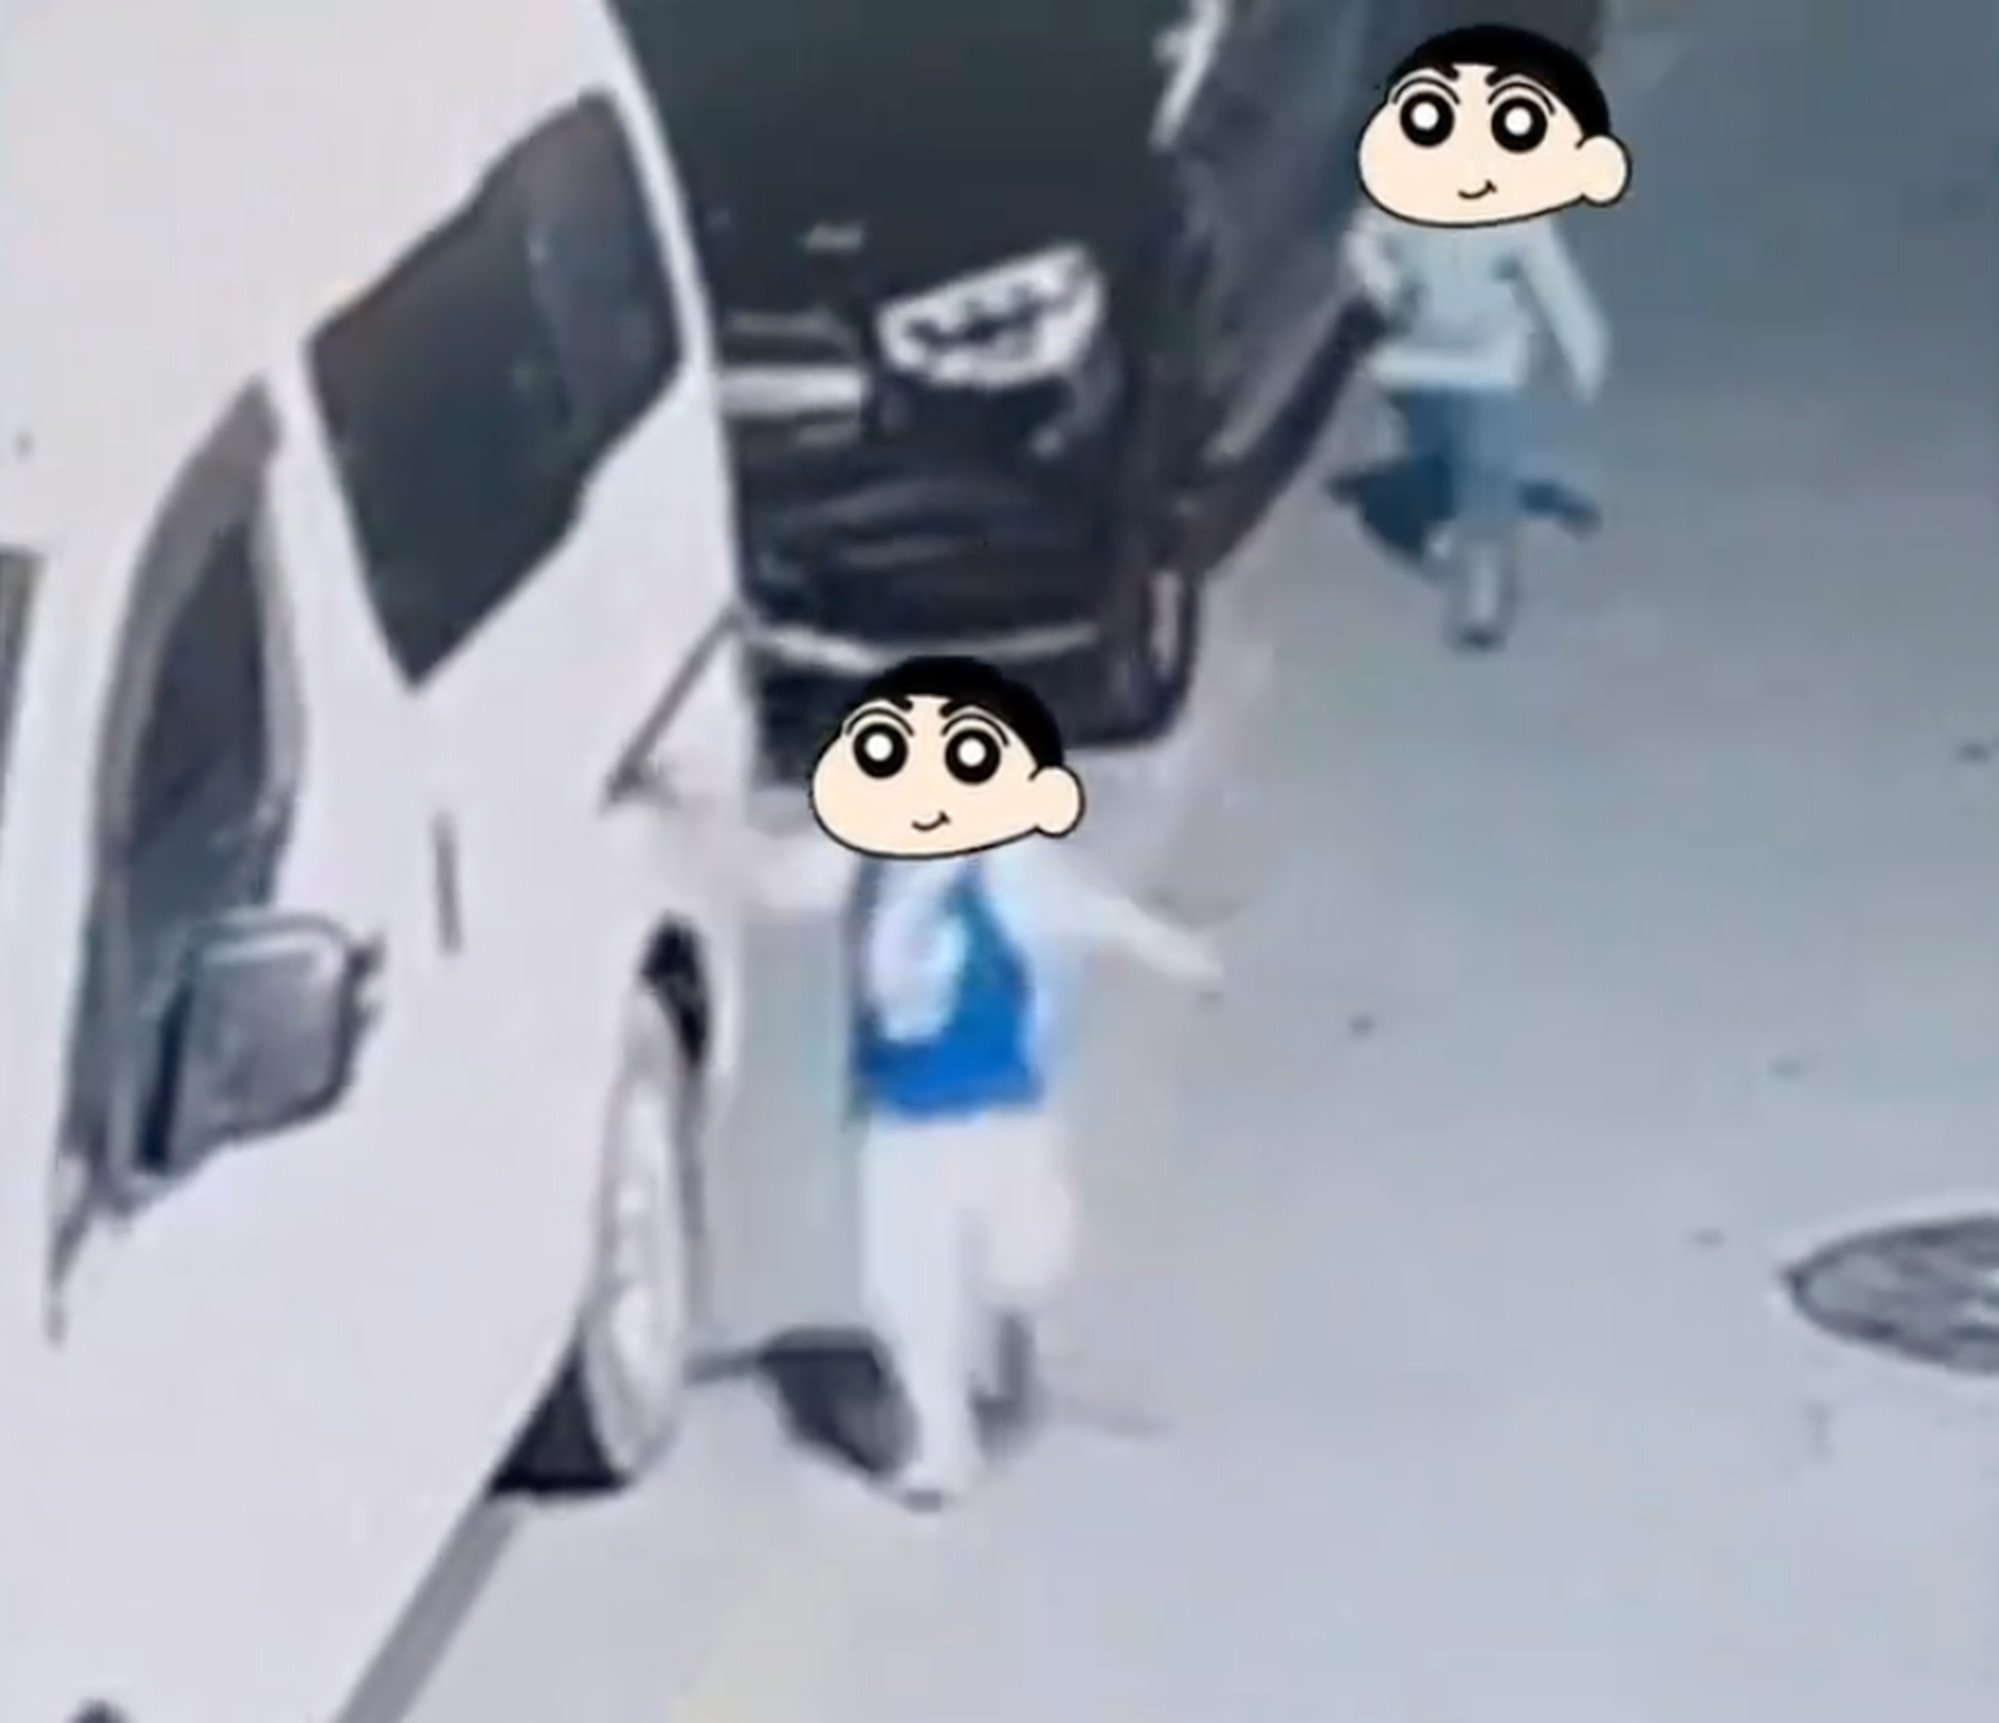 The boy and his friend caught on camera damaging the cars. Photo: Baidu